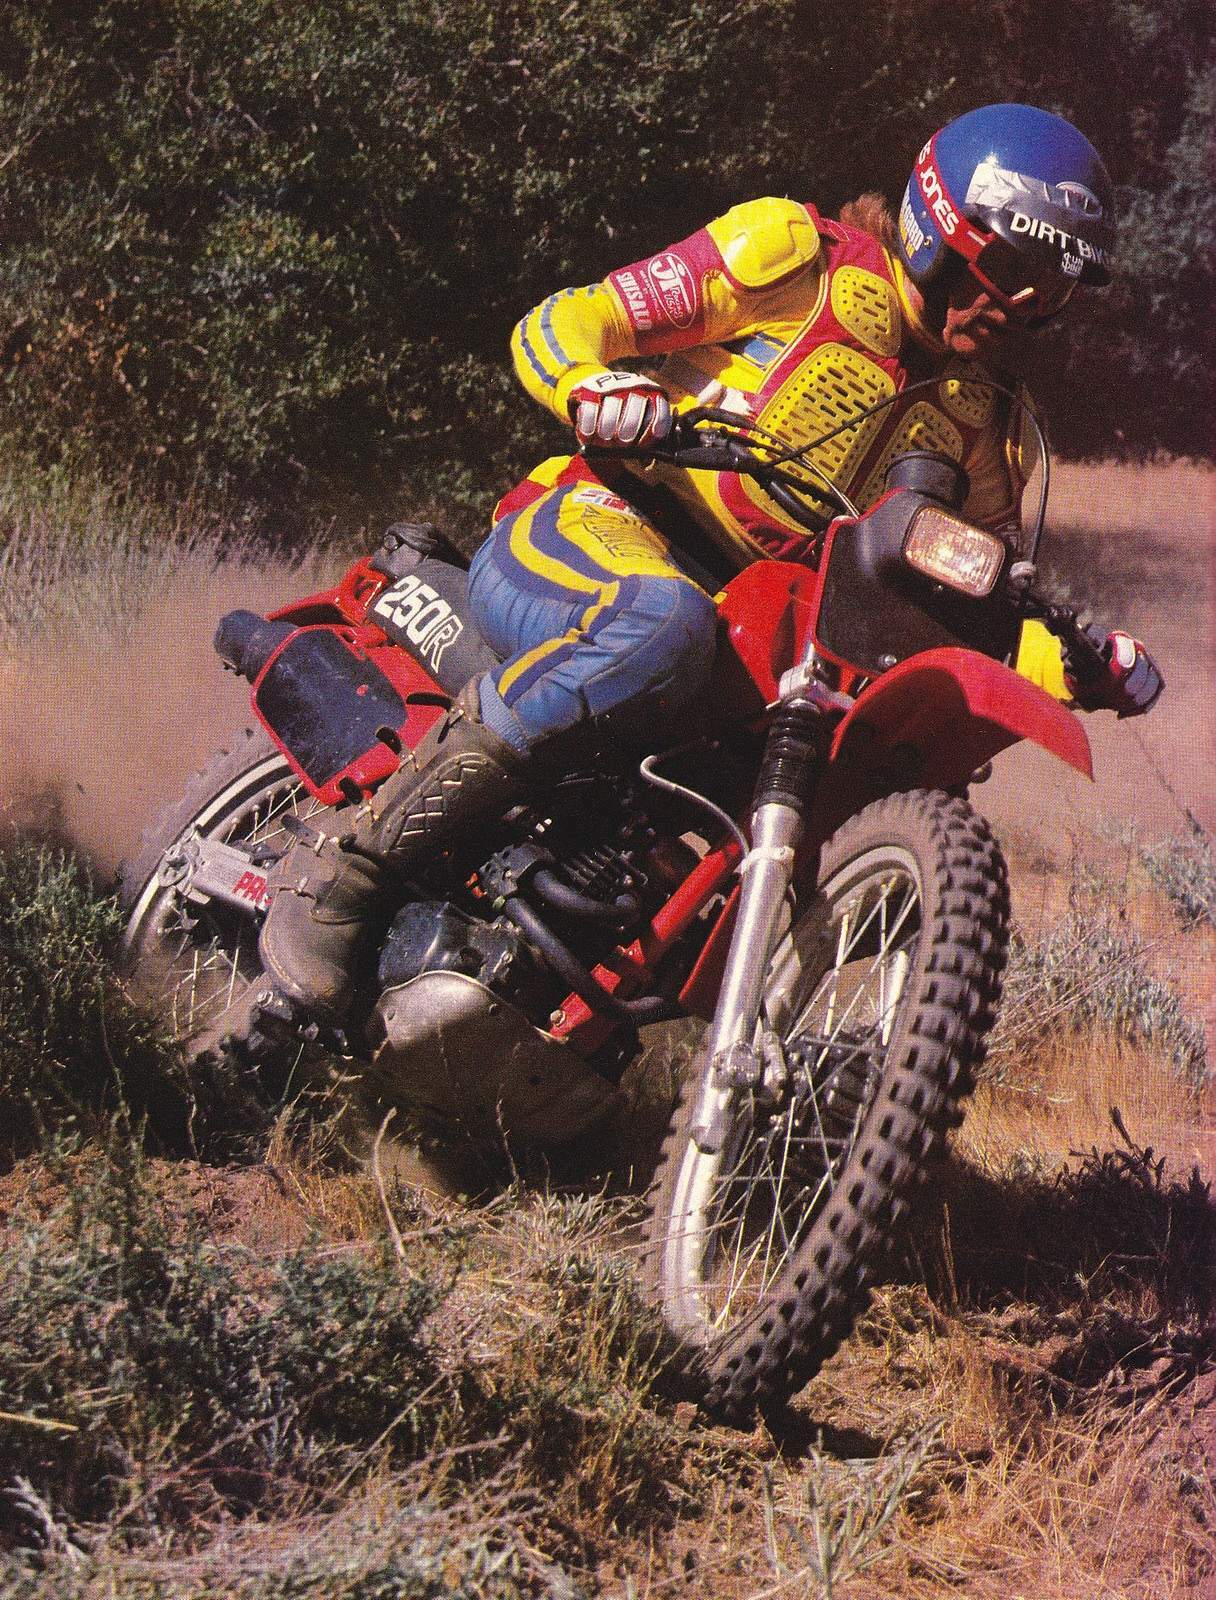 Honda XR 250 For Sale Specifications, Price and Images